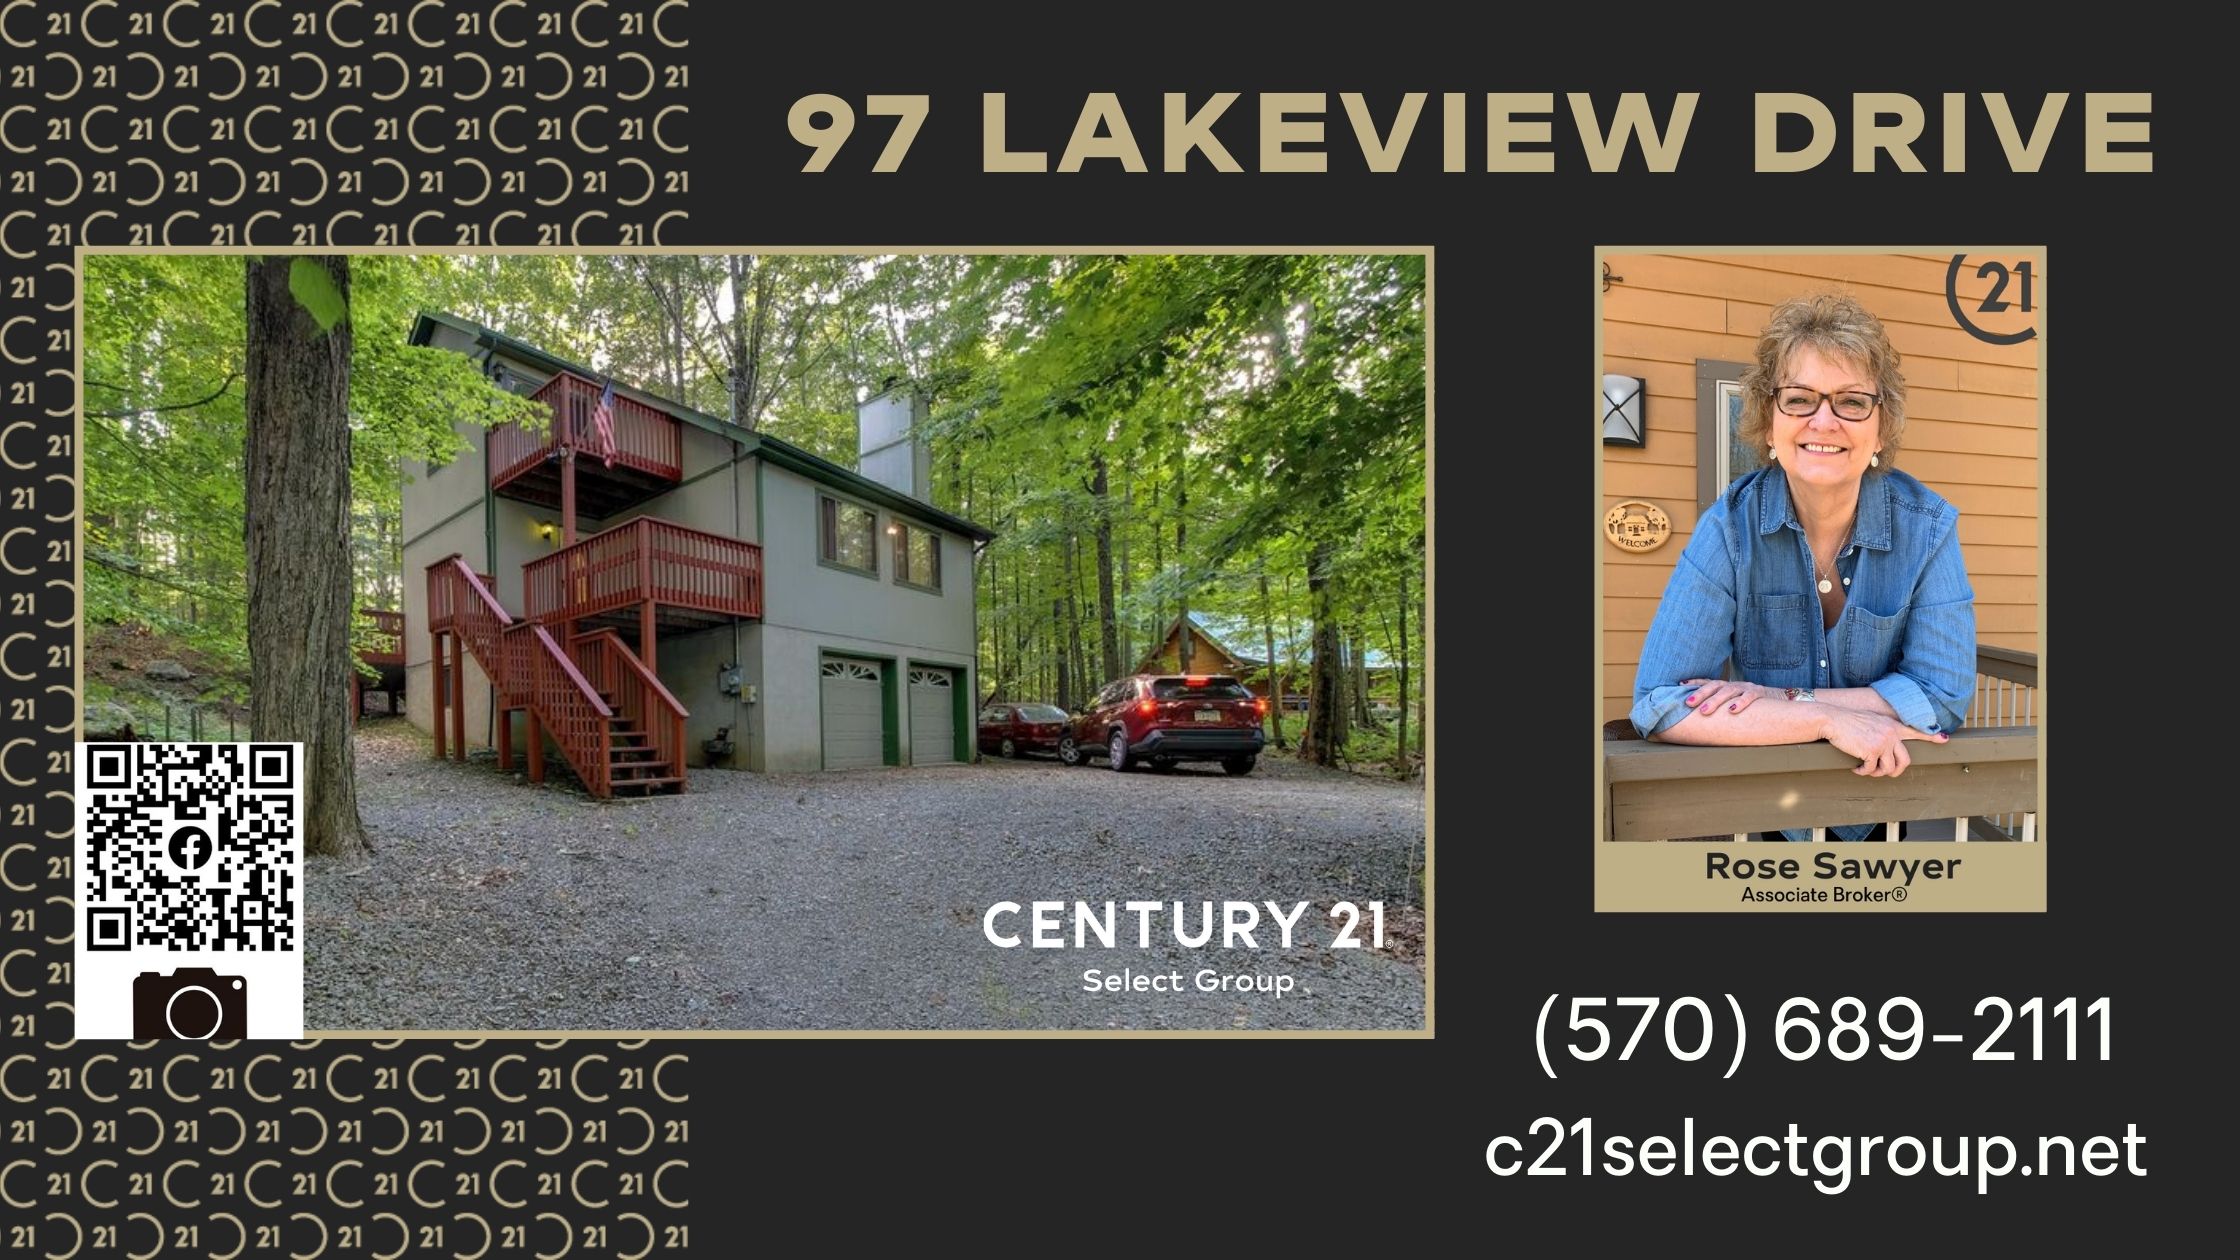 NEW PRICE! 97 Lakeview Drive: Supreme Hideout Saltbox Home